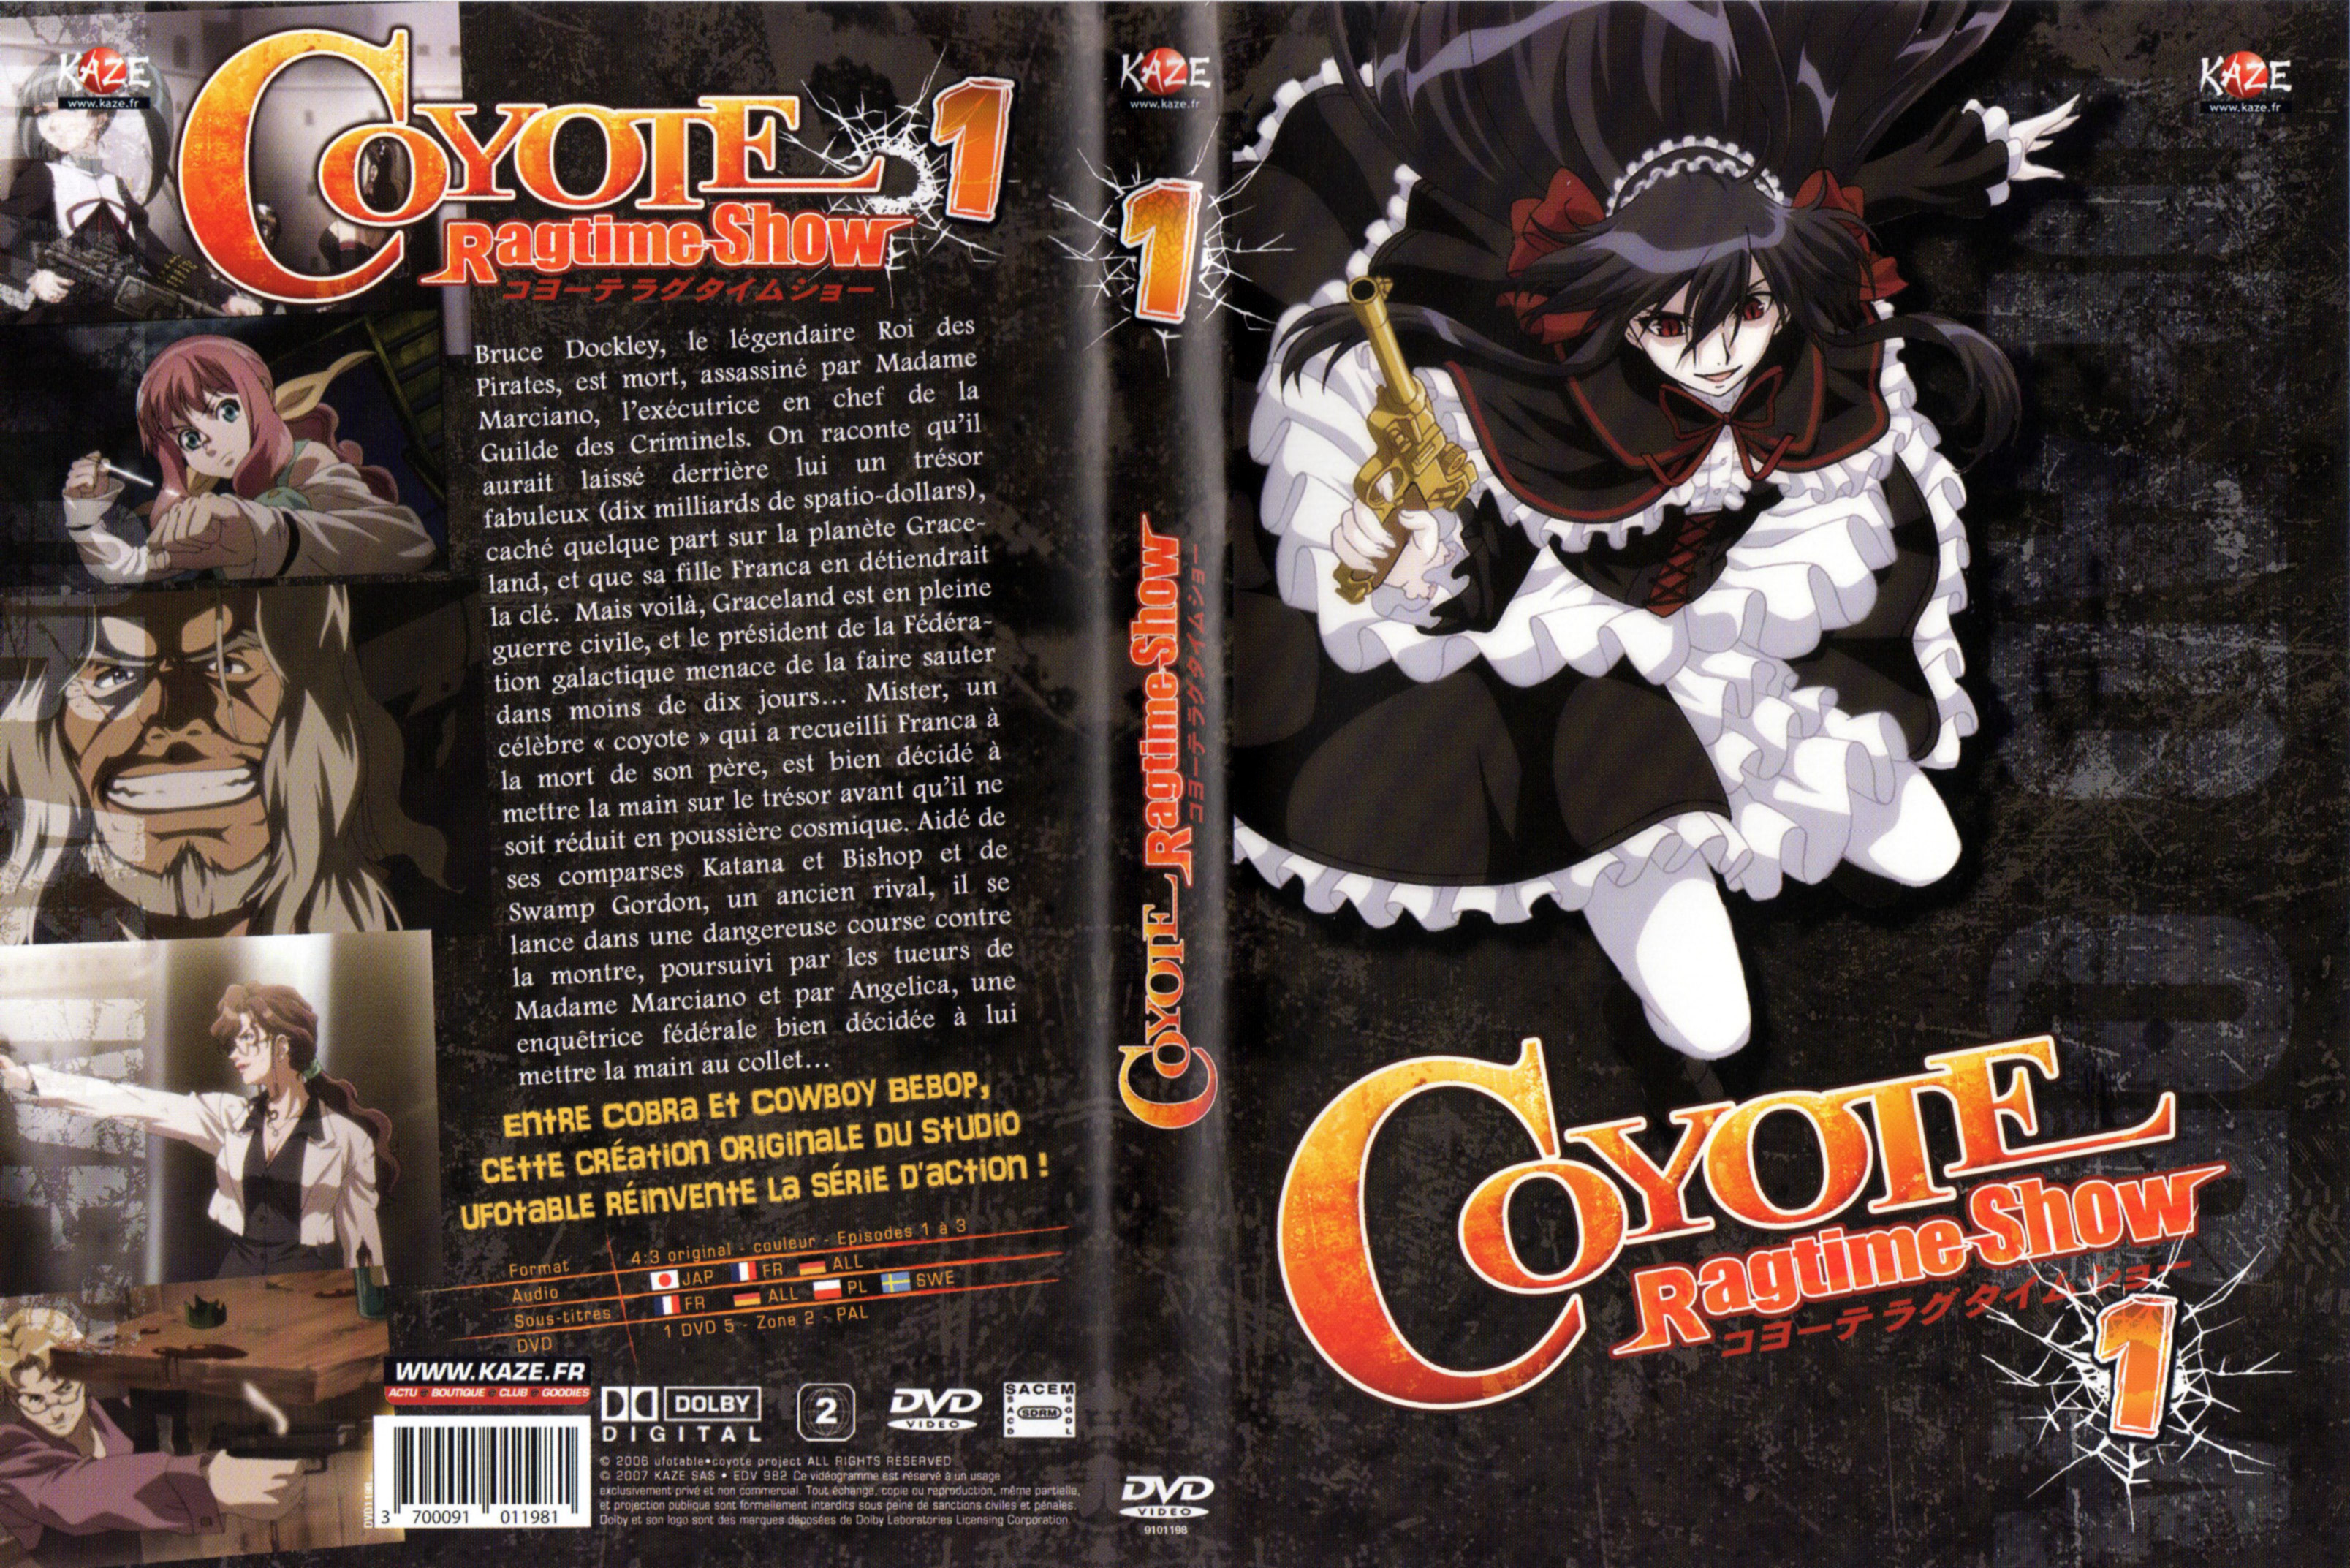 Jaquette DVD Coyote ragtime show vol 1